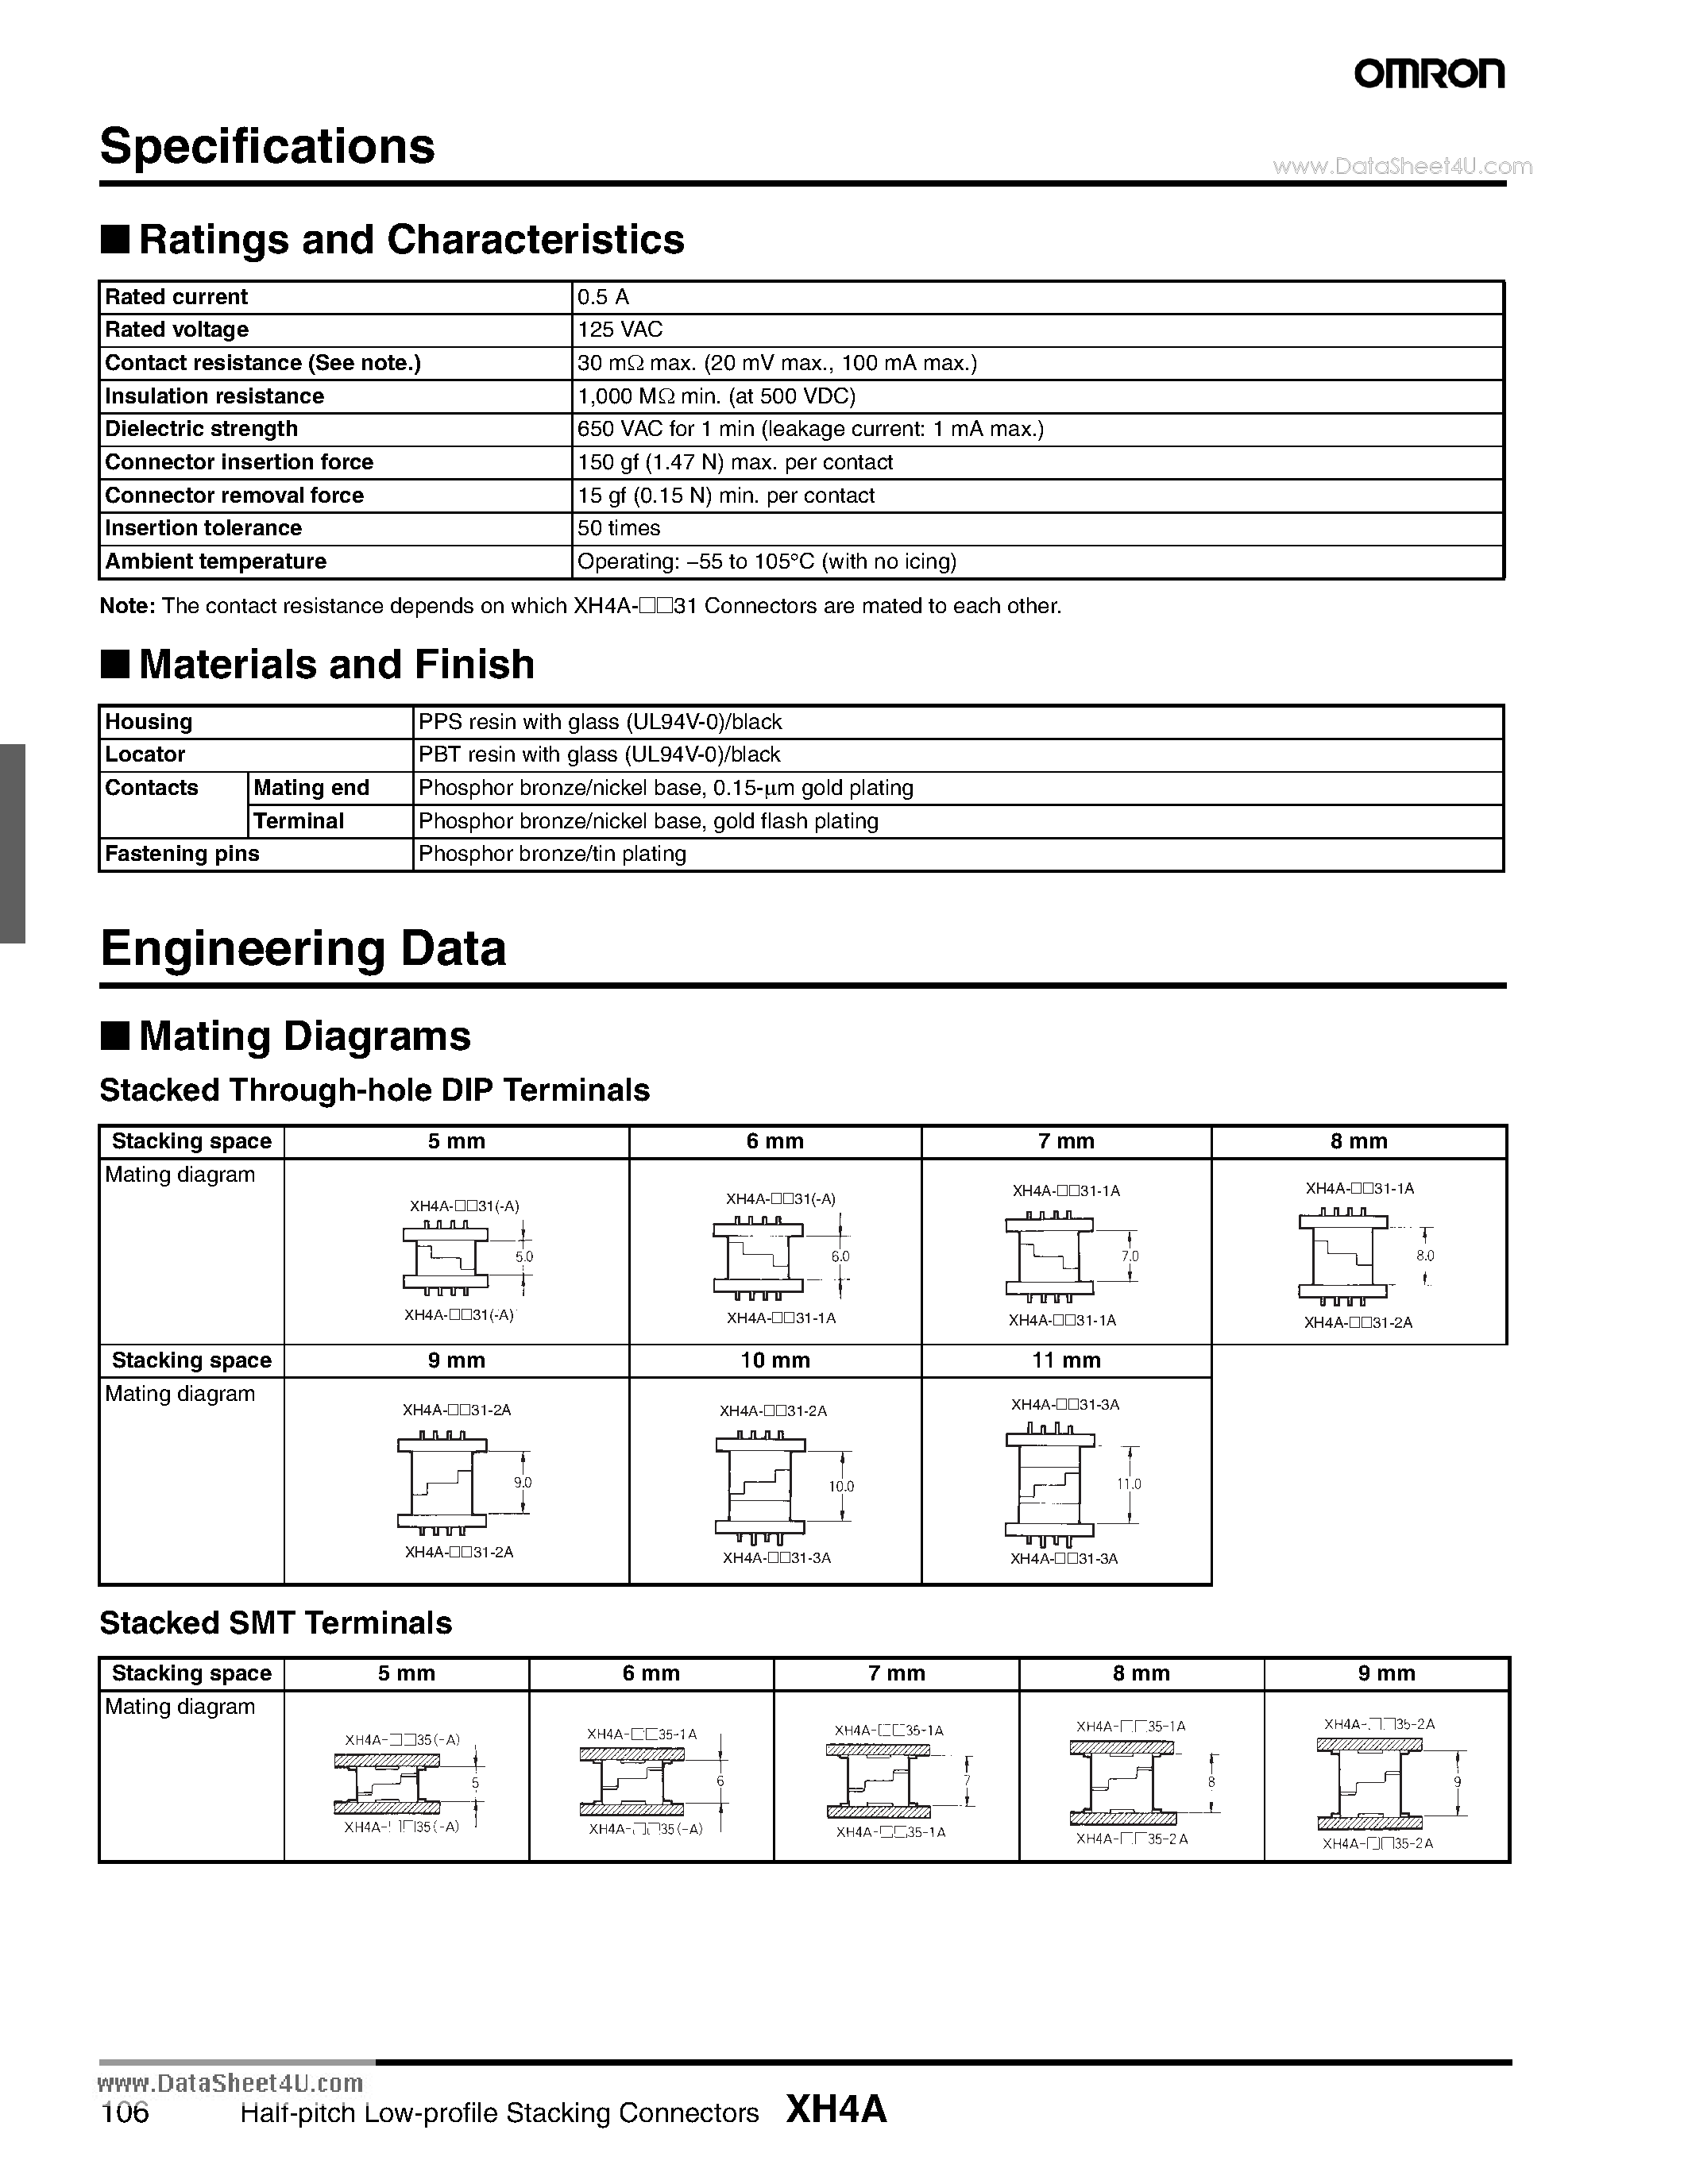 Datasheet XH4A - Half-pitch Low-profile Stacking Connectors page 2